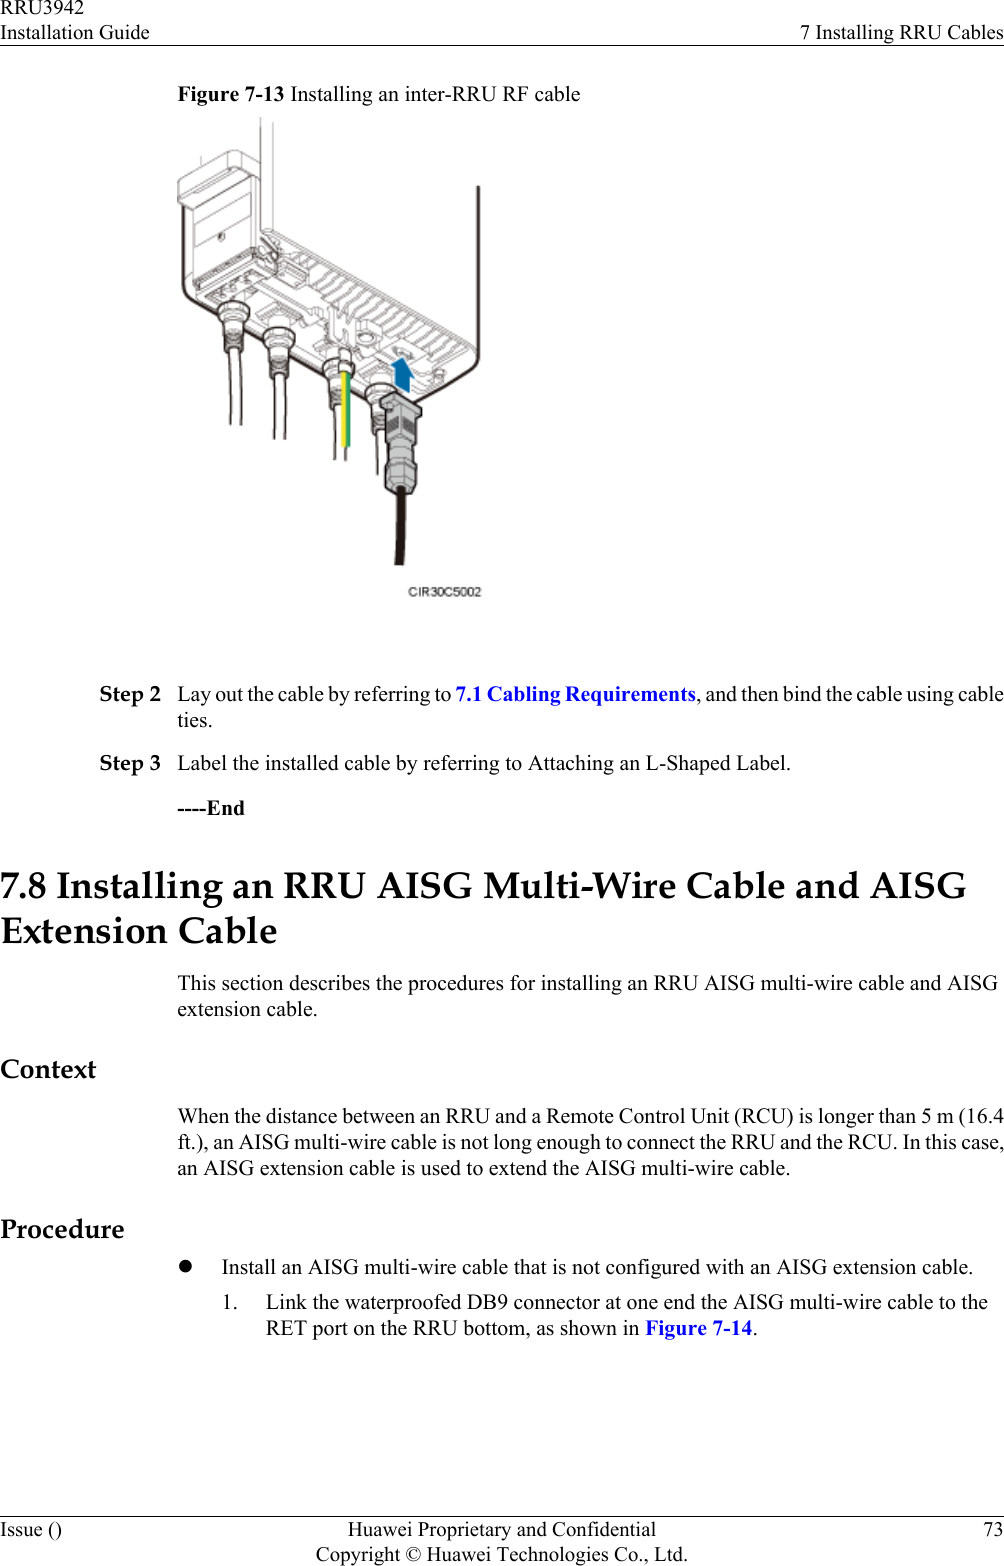 Figure 7-13 Installing an inter-RRU RF cable Step 2 Lay out the cable by referring to 7.1 Cabling Requirements, and then bind the cable using cableties.Step 3 Label the installed cable by referring to Attaching an L-Shaped Label.----End7.8 Installing an RRU AISG Multi-Wire Cable and AISGExtension CableThis section describes the procedures for installing an RRU AISG multi-wire cable and AISGextension cable.ContextWhen the distance between an RRU and a Remote Control Unit (RCU) is longer than 5 m (16.4ft.), an AISG multi-wire cable is not long enough to connect the RRU and the RCU. In this case,an AISG extension cable is used to extend the AISG multi-wire cable.ProcedurelInstall an AISG multi-wire cable that is not configured with an AISG extension cable.1. Link the waterproofed DB9 connector at one end the AISG multi-wire cable to theRET port on the RRU bottom, as shown in Figure 7-14.RRU3942Installation Guide 7 Installing RRU CablesIssue () Huawei Proprietary and ConfidentialCopyright © Huawei Technologies Co., Ltd.73